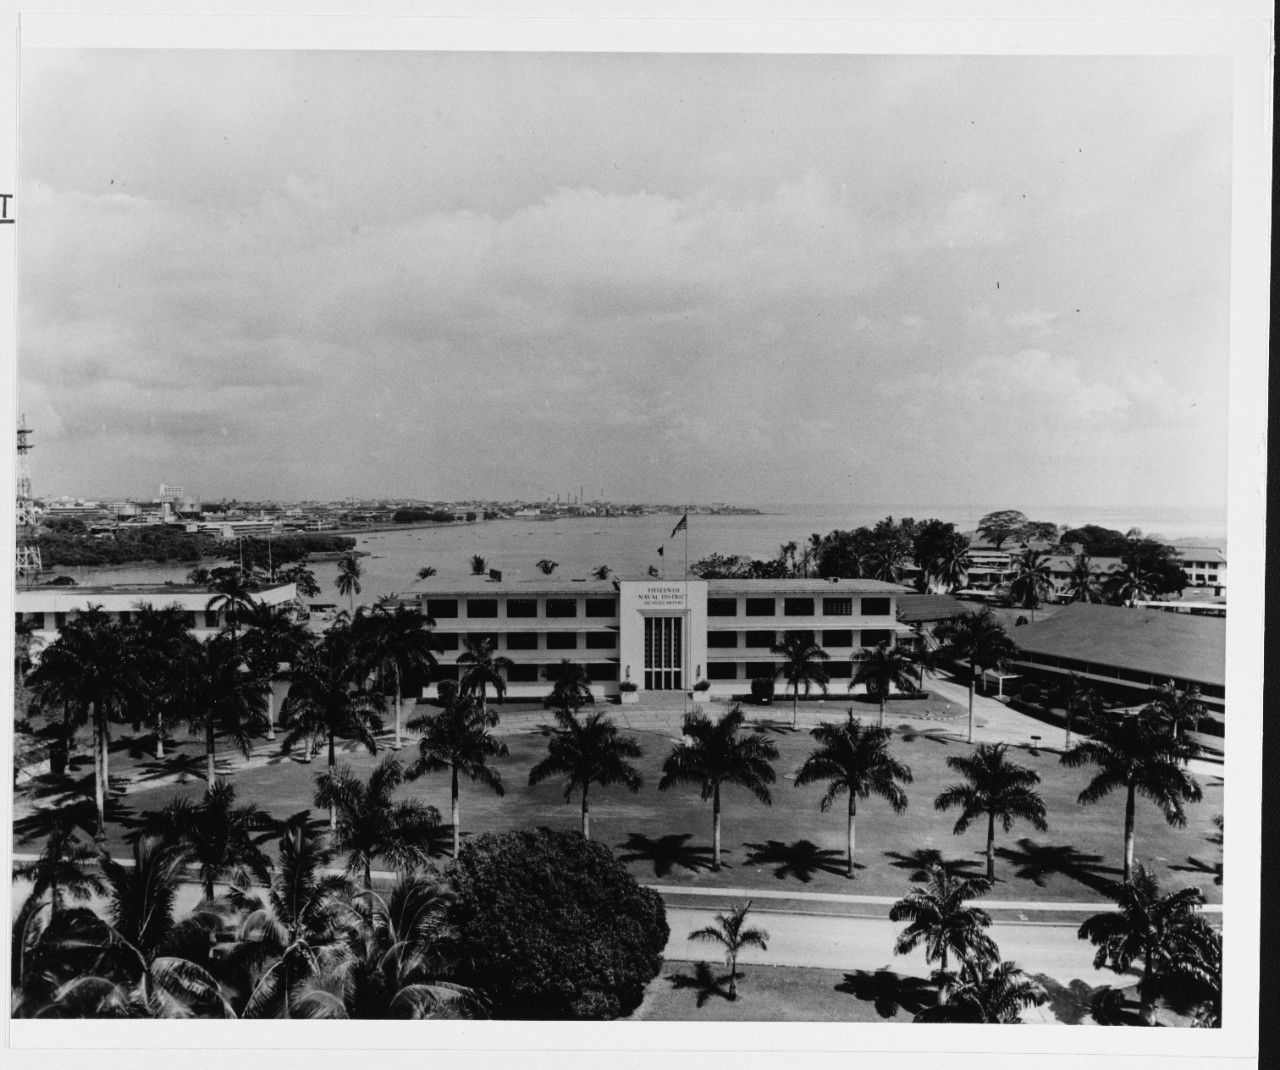 Fifteenth Naval District Headquarters, Balboa Canal Zone